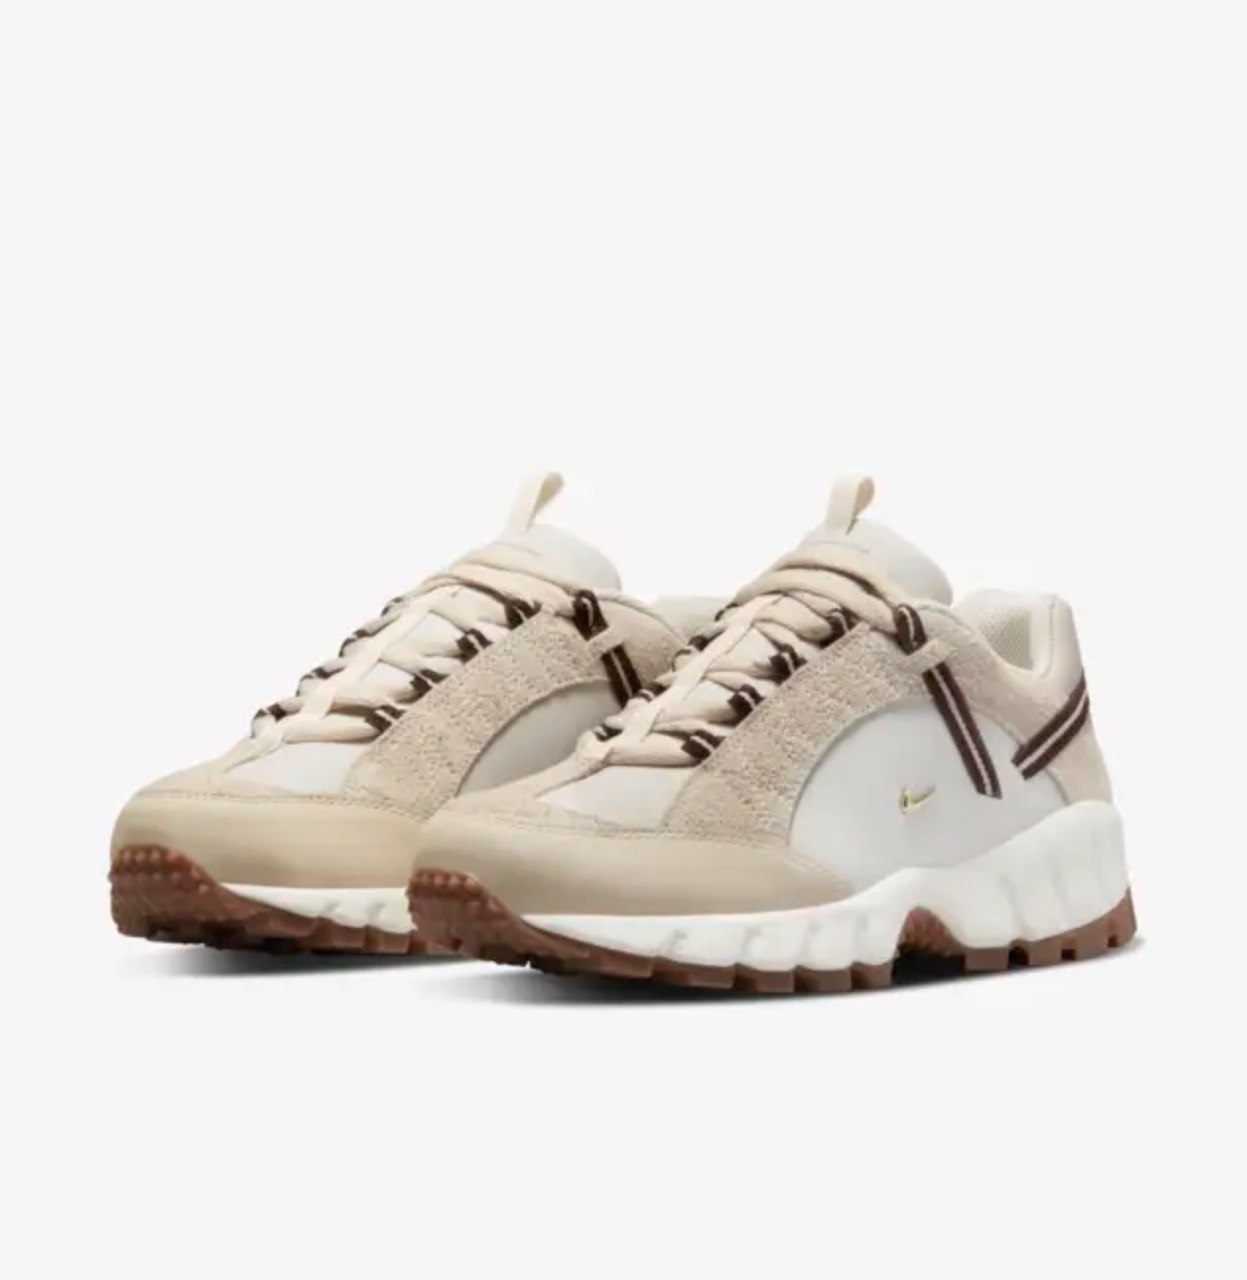 Capitán Brie Aproximación Viaje NIKE TO RELEASE EXCLUSIVE LUXE AIR HUMARA SHOES IN SINGAPORE ON 5TH AUGUST  2022! – Shout